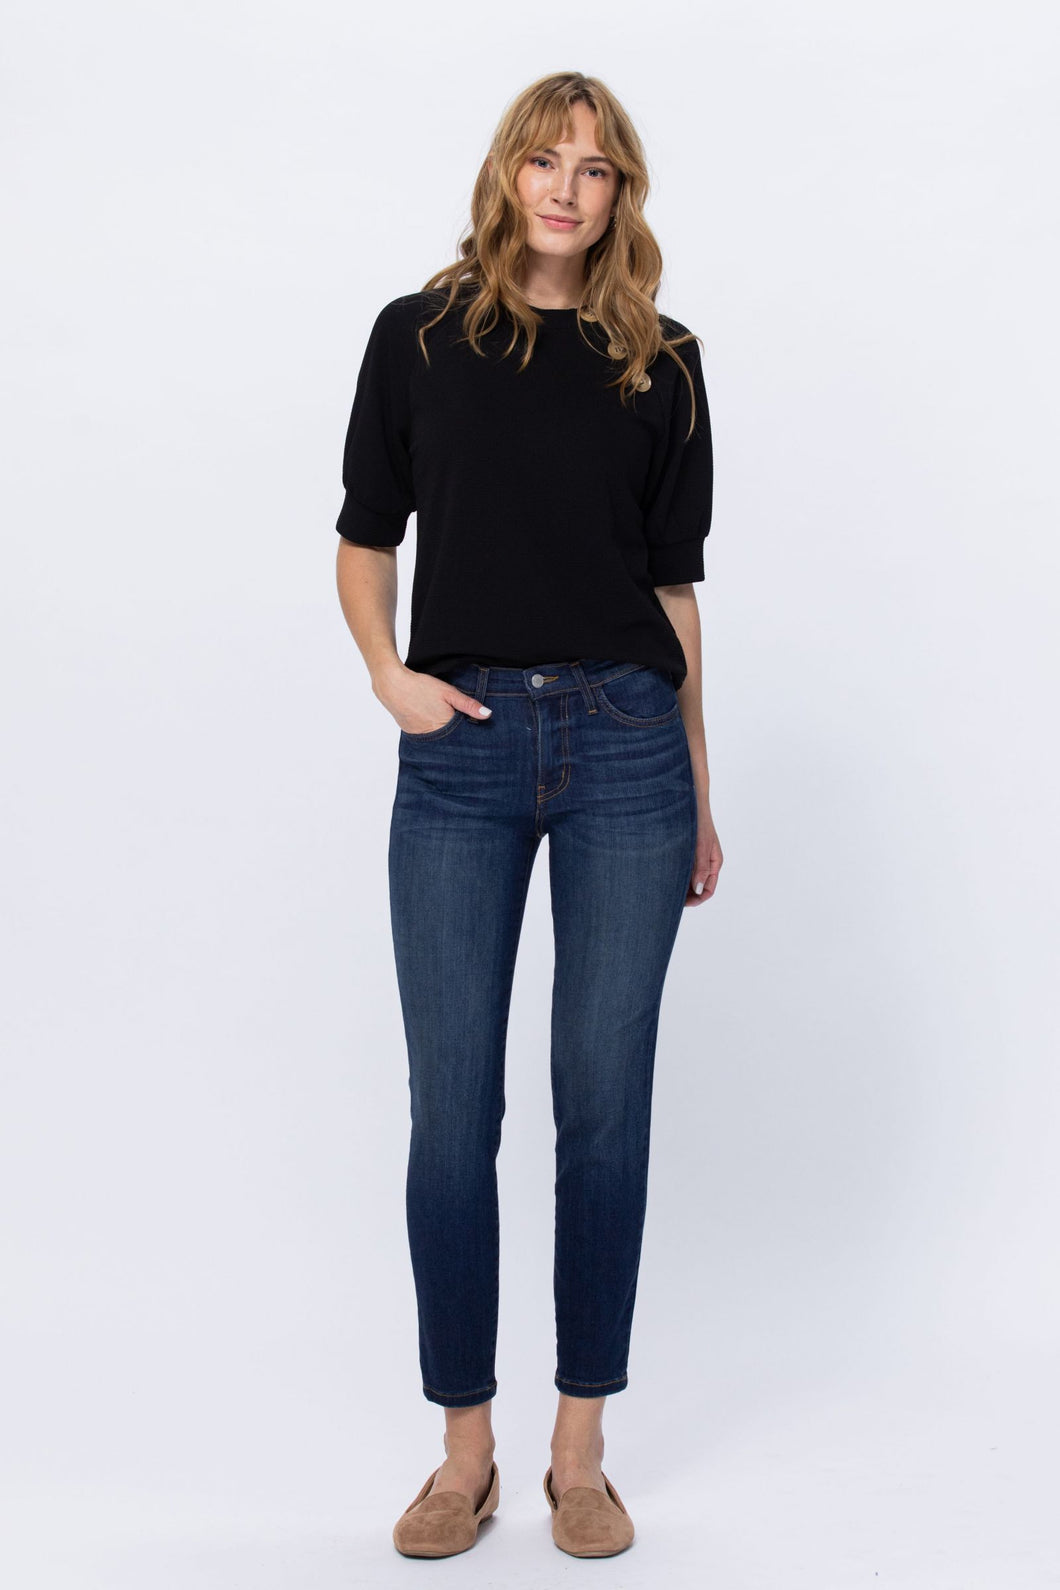 Judy Blue Hand-sand Relaxed Fit Jean